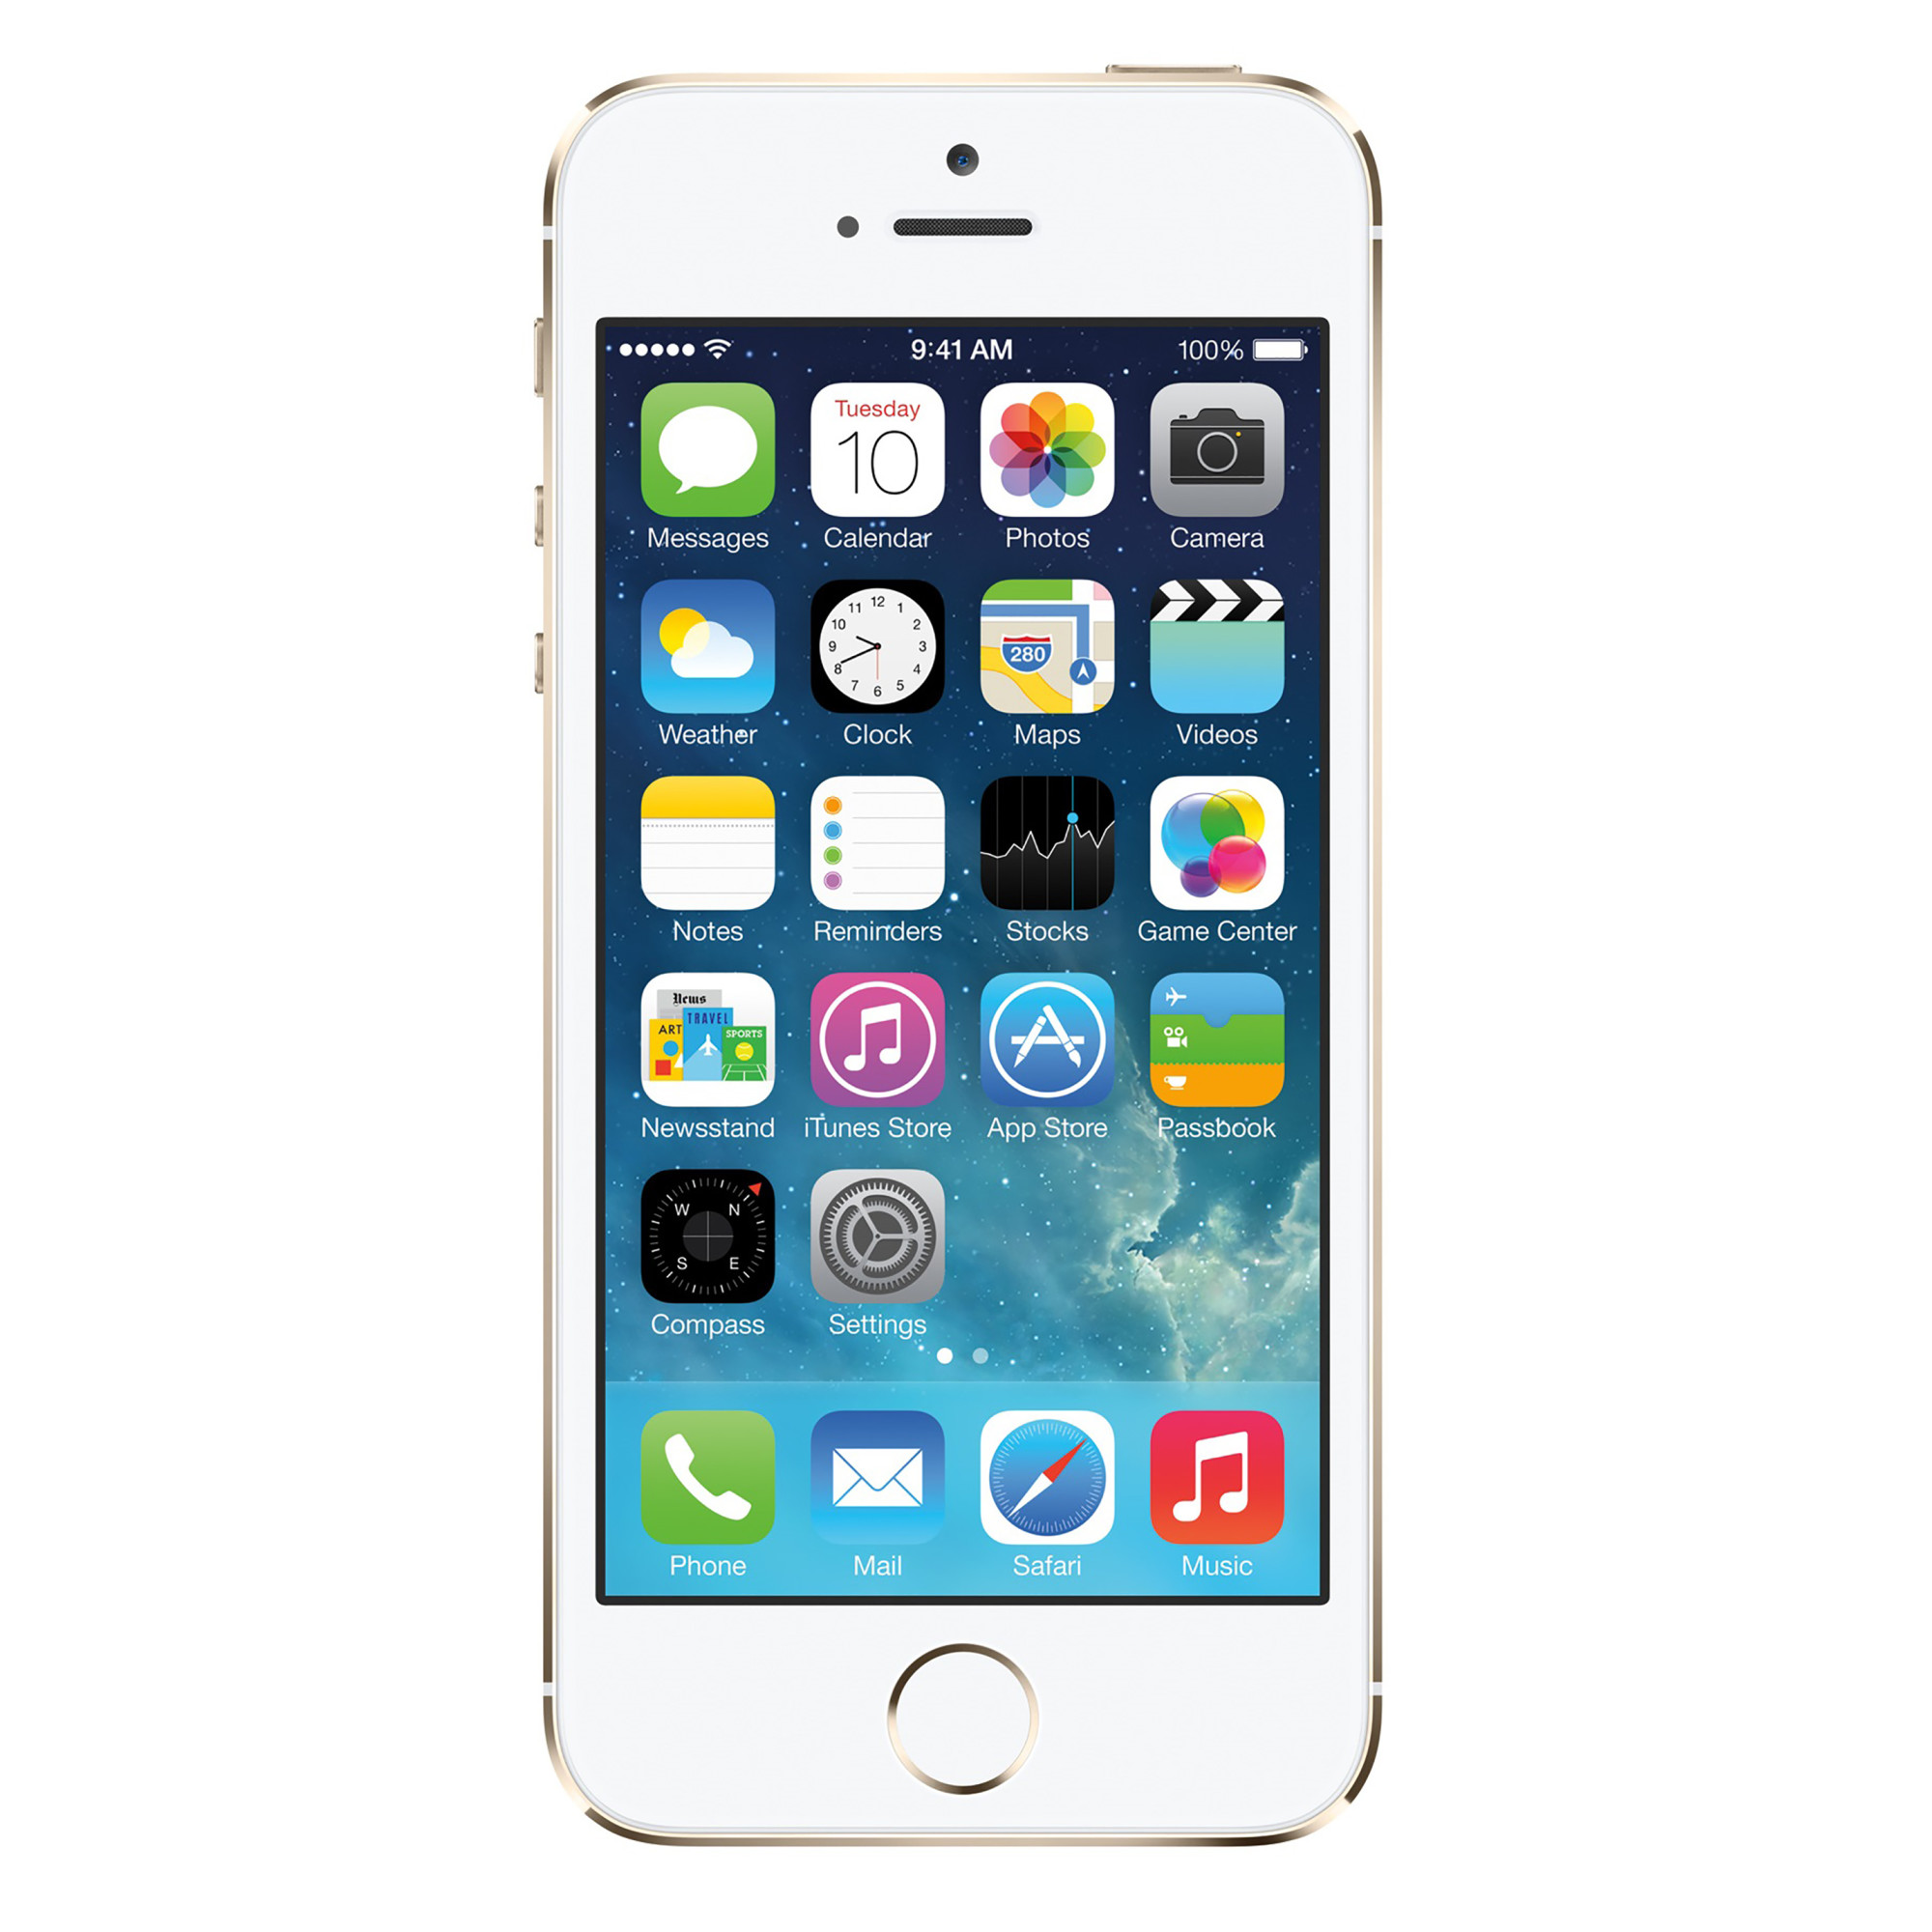 Restored Apple iPhone 5S 16GB, Gold - Locked AT&T (Refurbished) - image 1 of 3